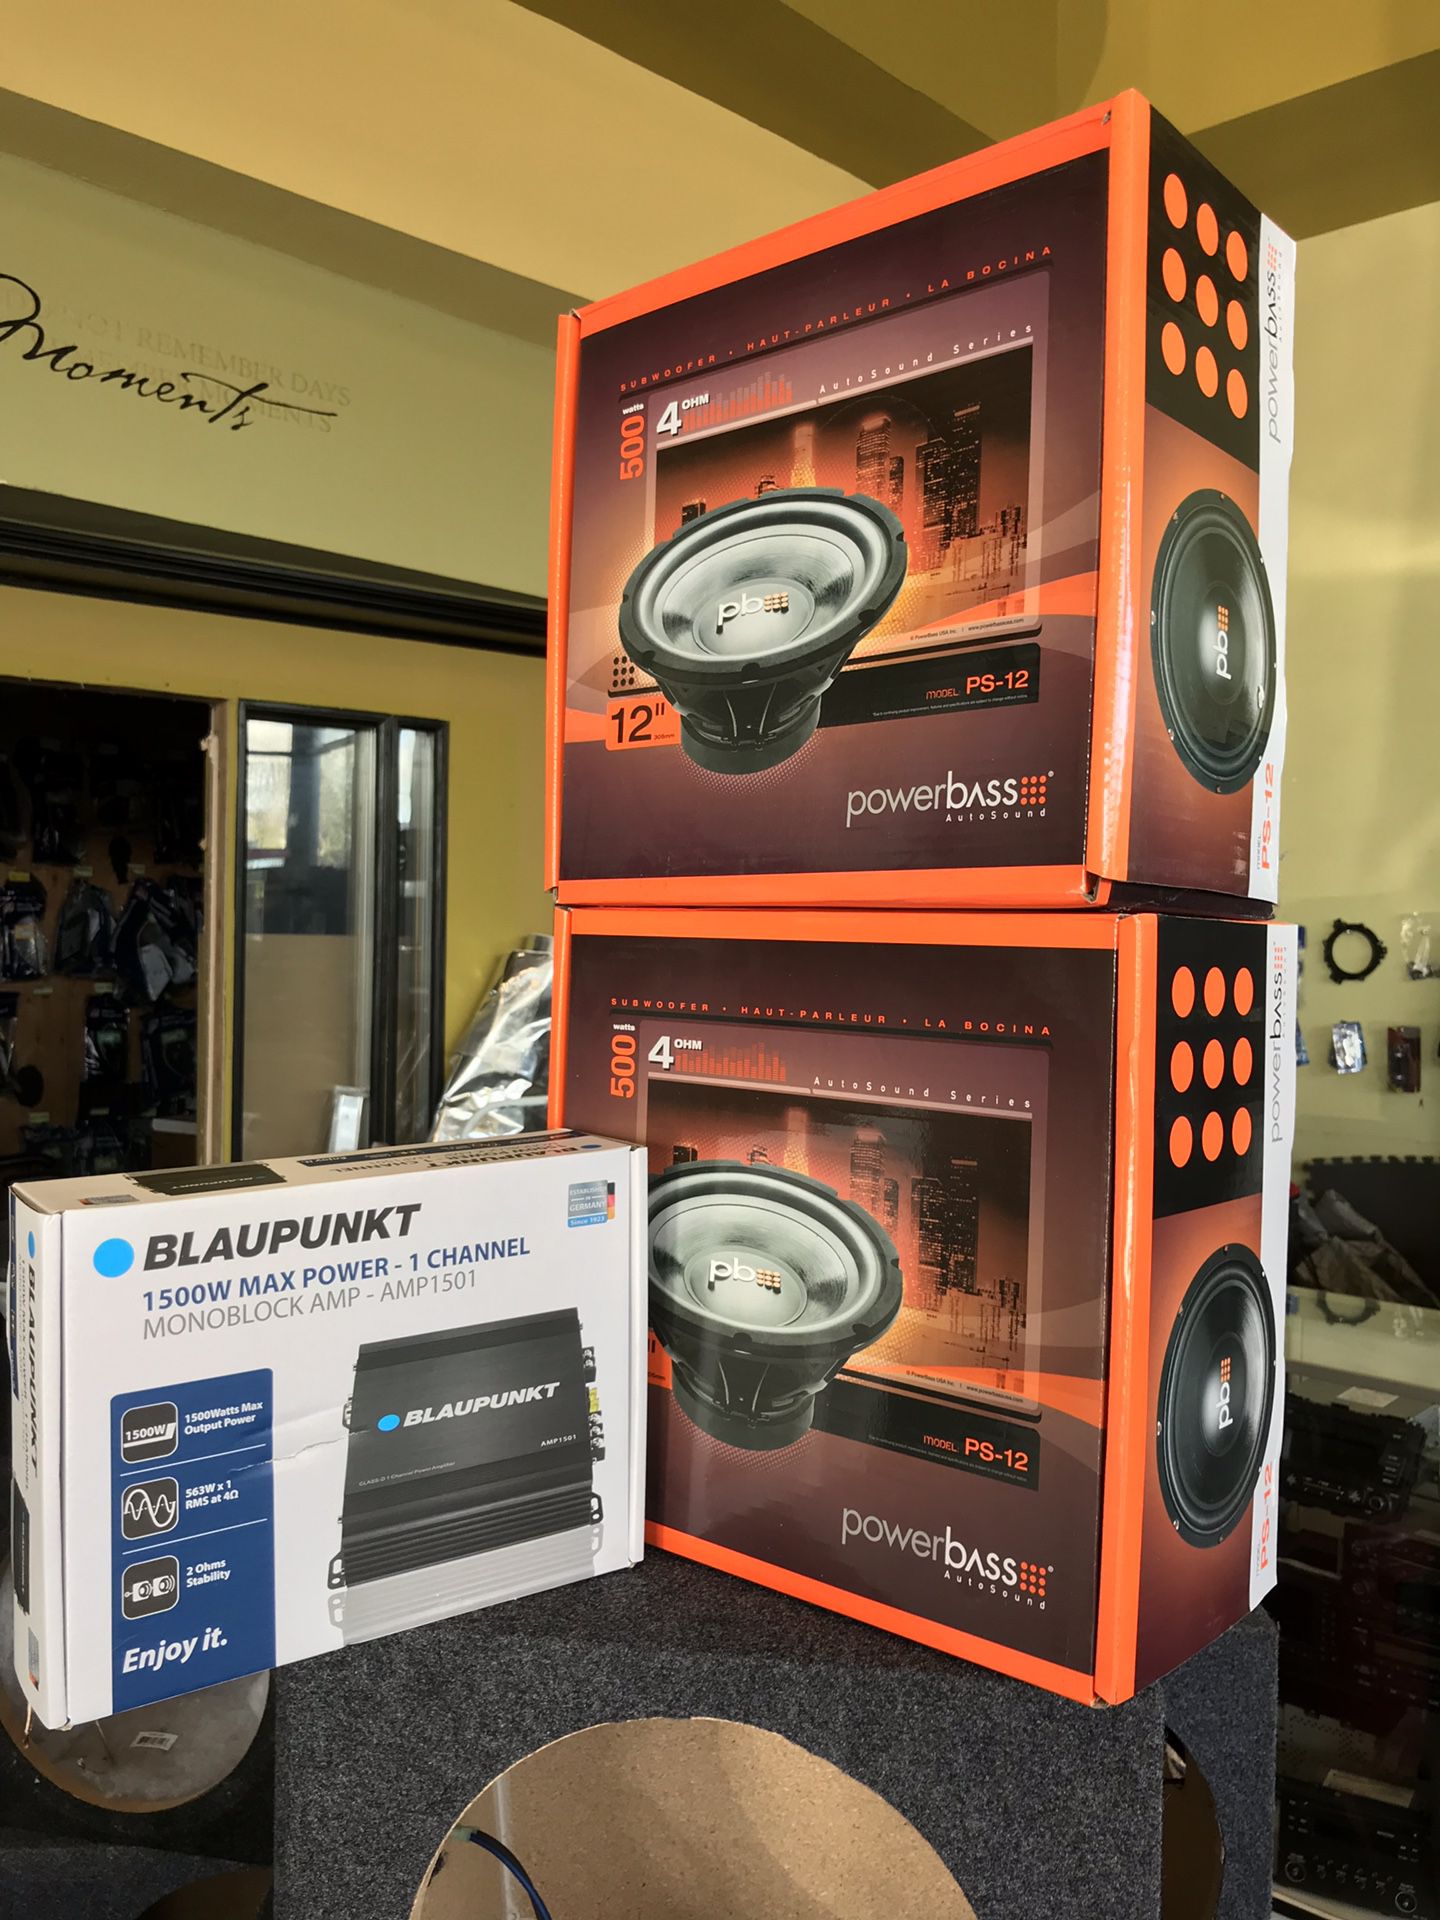 Car audio bundle deal 2. 12” subwoofer 500w each. With 1500w amplifier. All brand new finance available 100 days to pay no interest easy approval